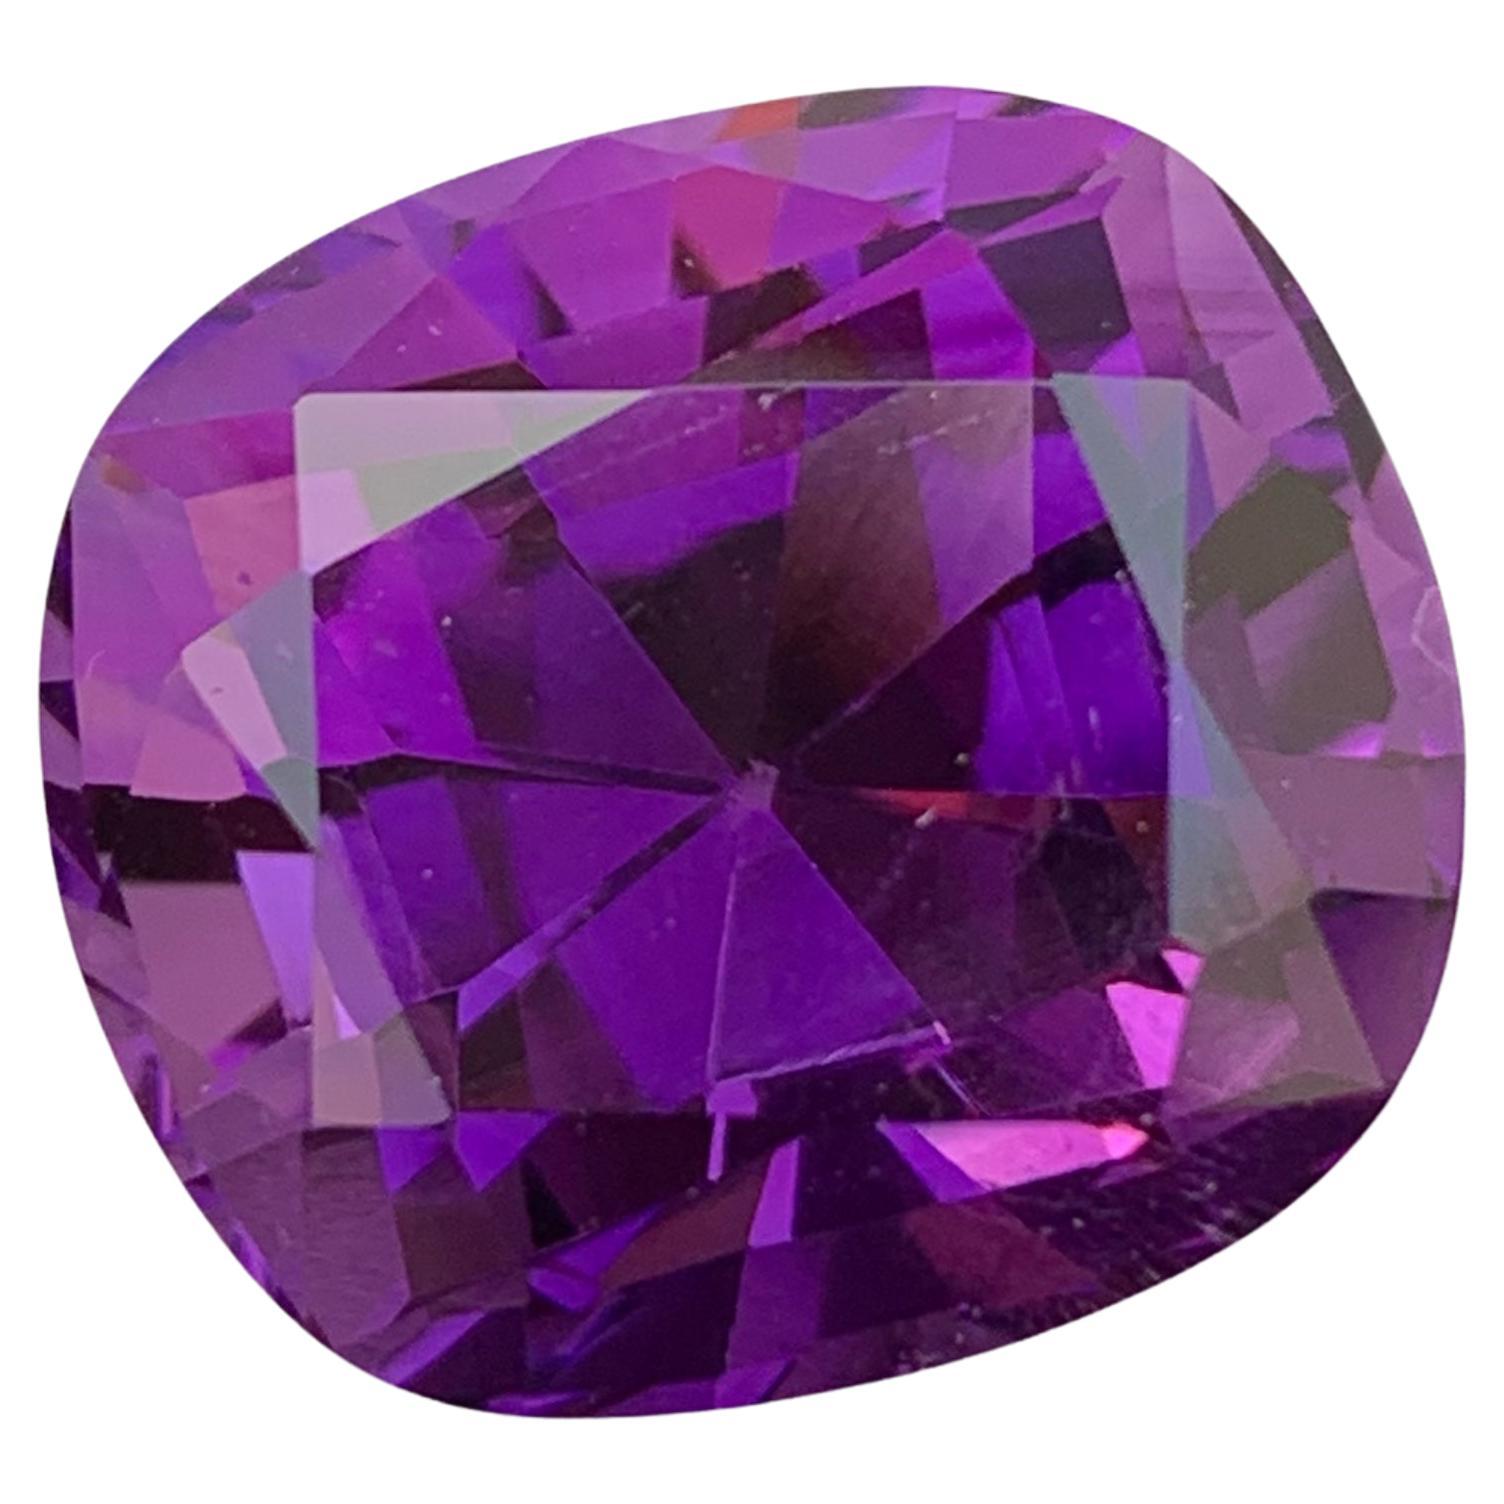 Exquisite Natural Loose Amethyst Stone 23.45 Carats Amethyst Jewelry For Sale